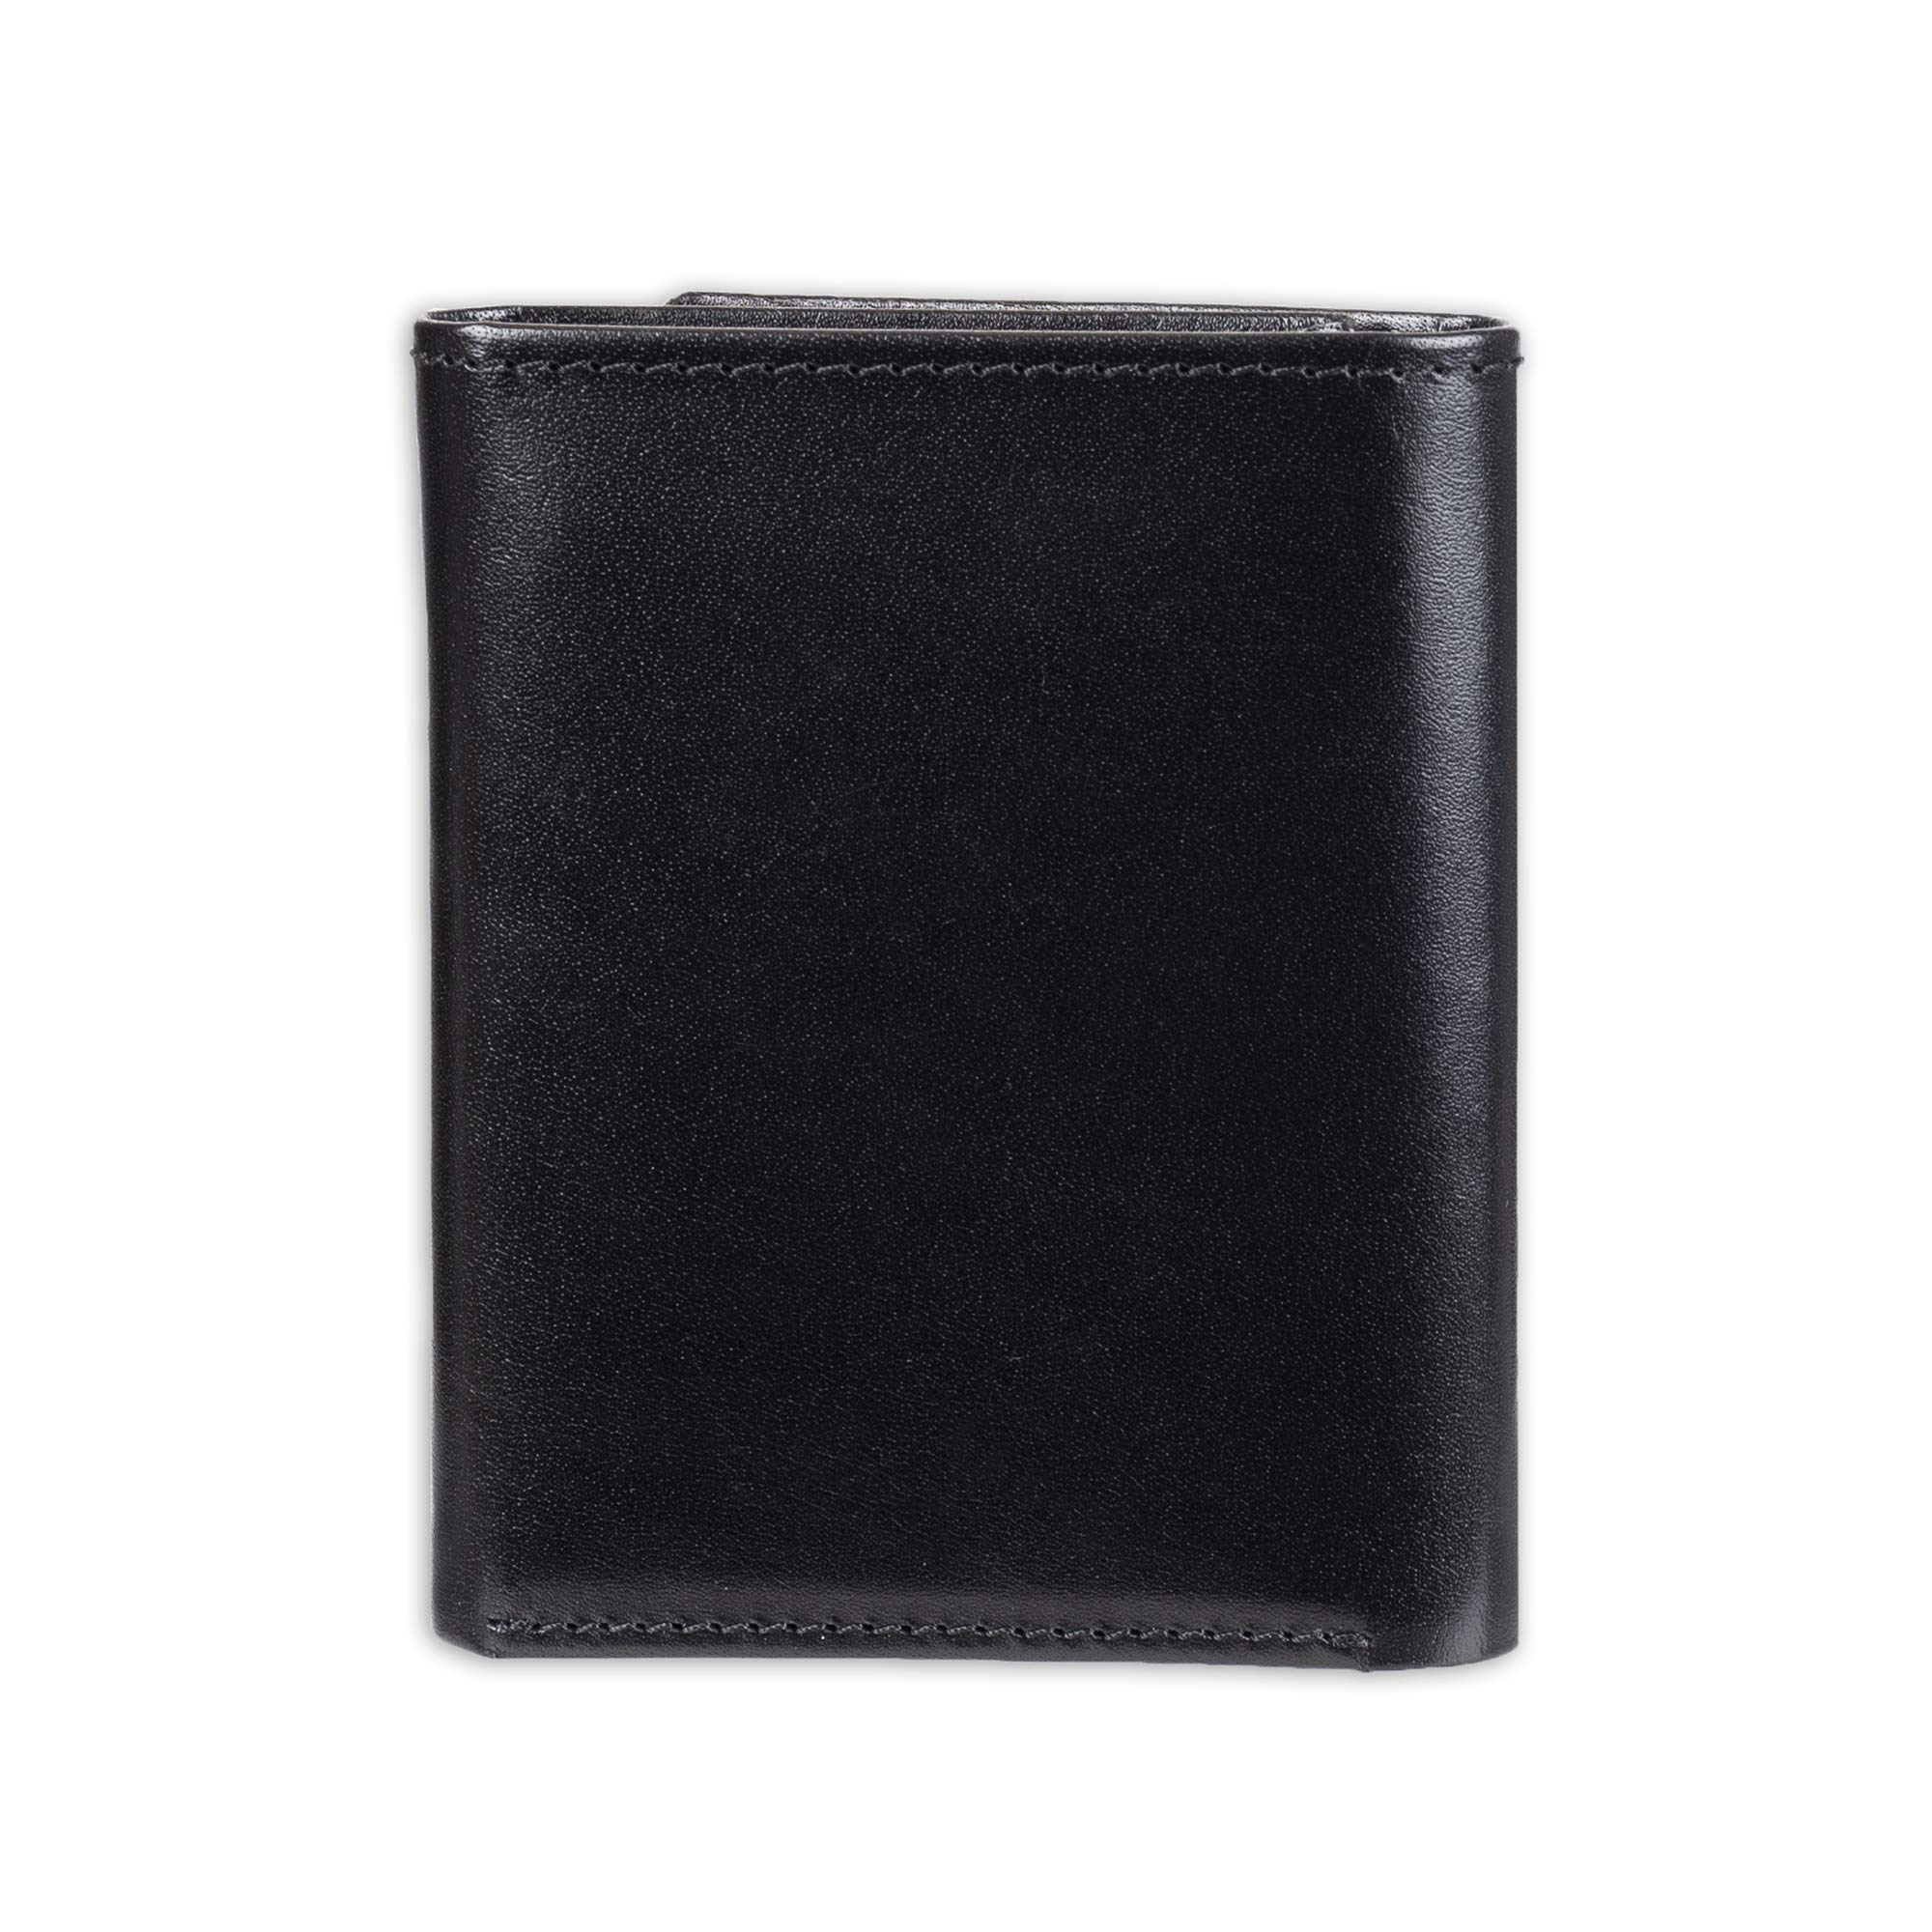 Guess Men's Leather Trifold Wallet With ID Window, Credit Card Slots, Bill Compartment, Extra Storage, and Gift Box Packaging